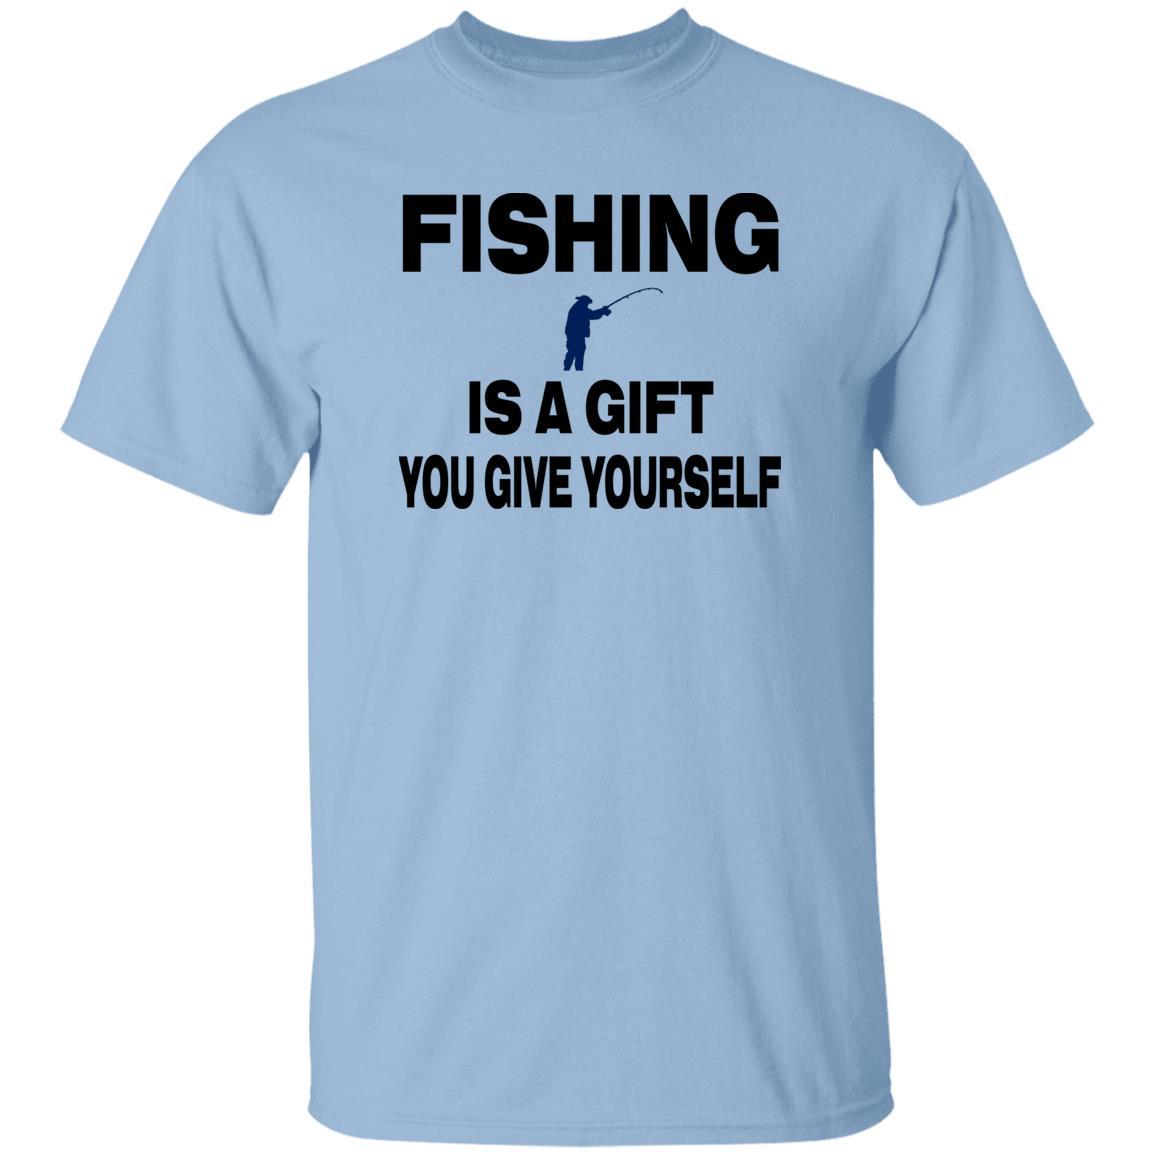 Fishing is a gift you give yourself T shirt b light-blue